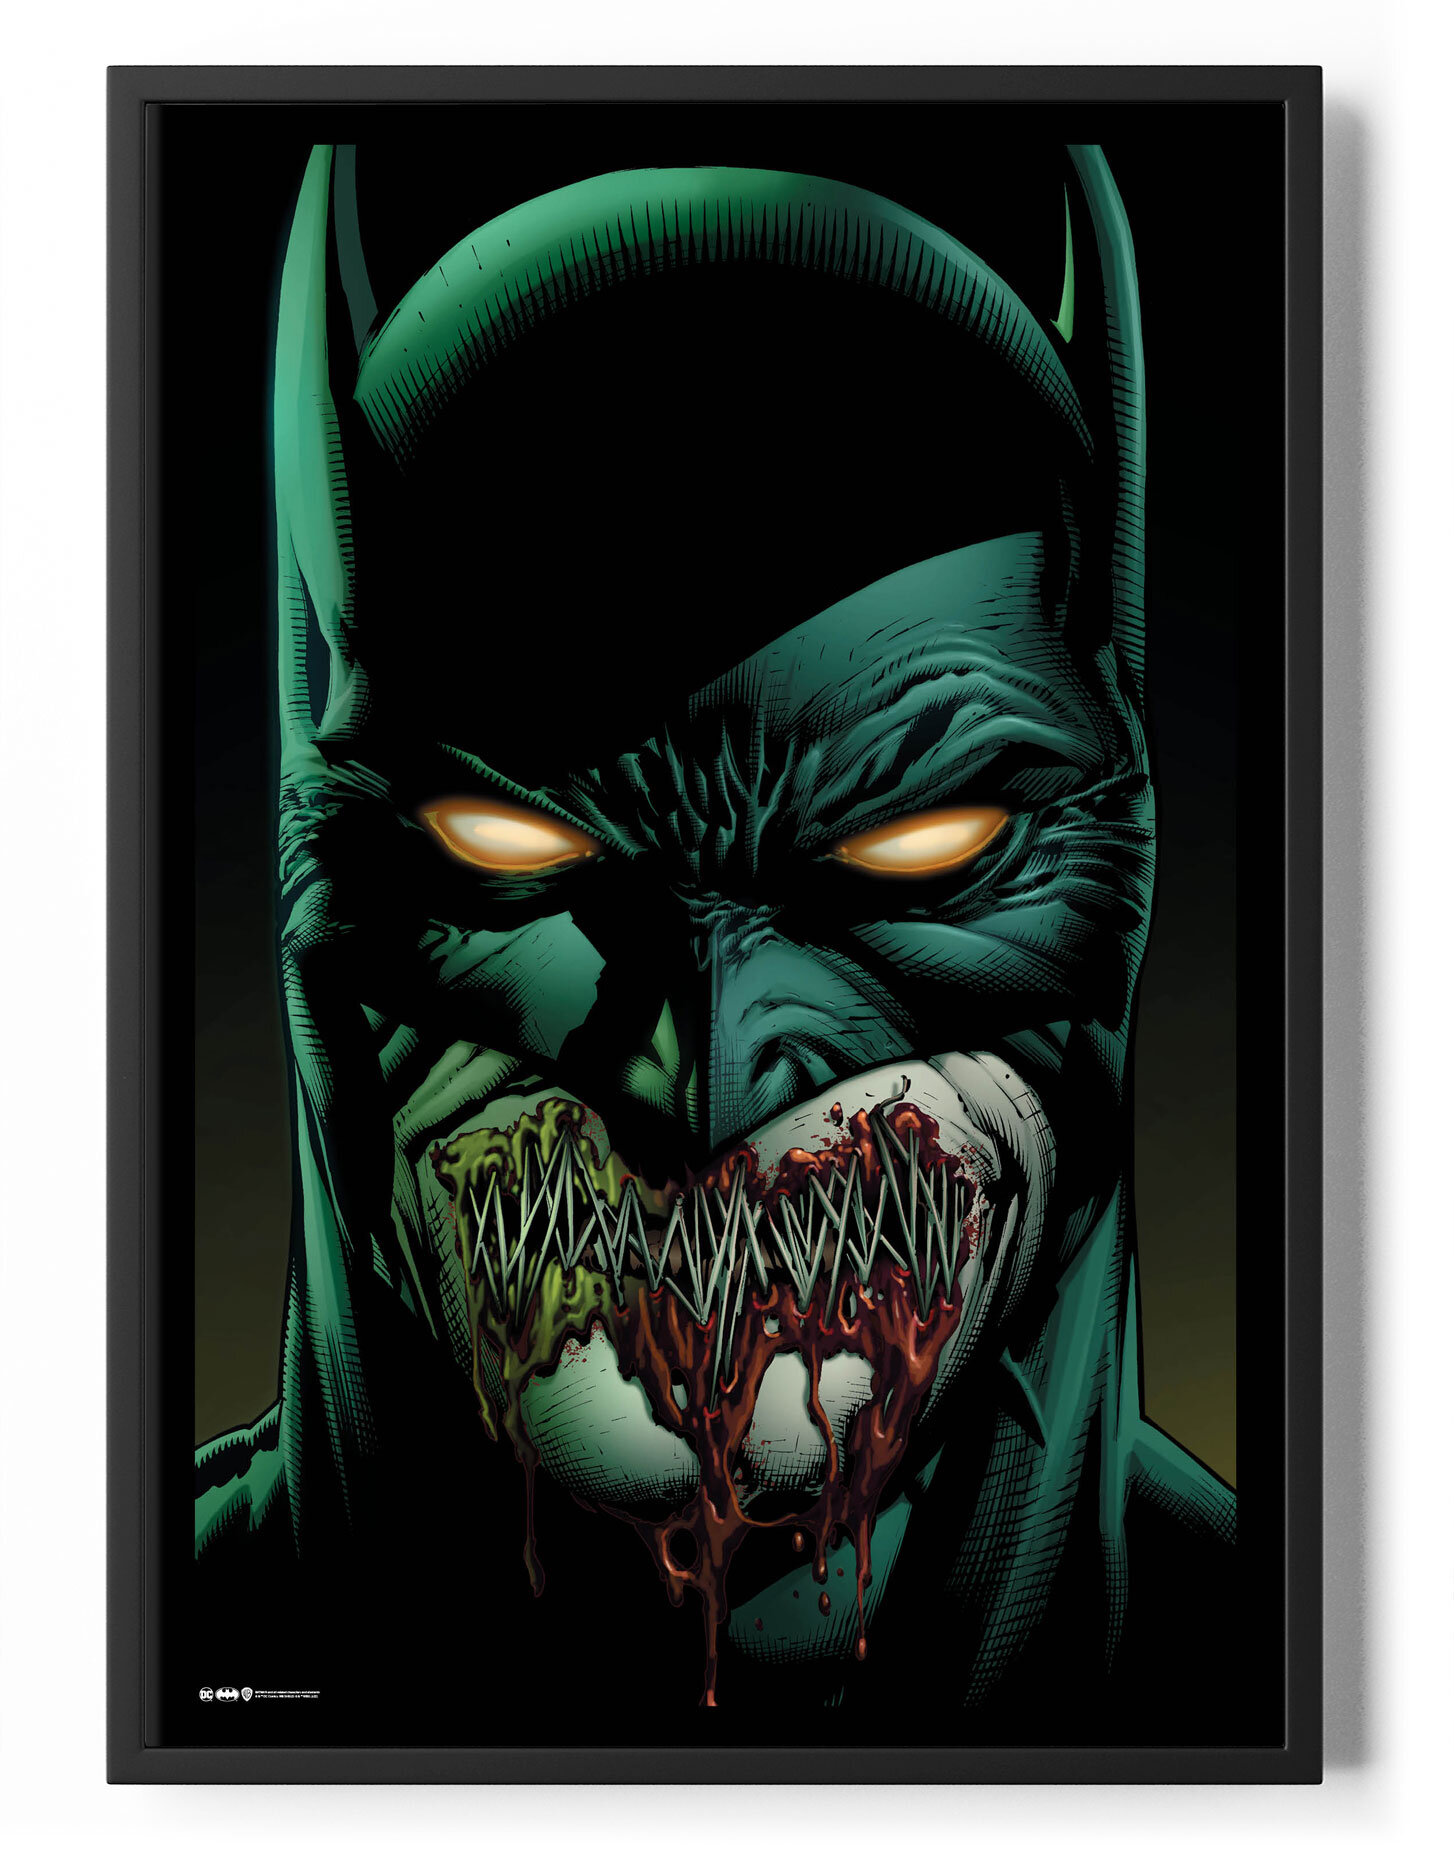 Scary Batman Cover Poster - Shirtstore